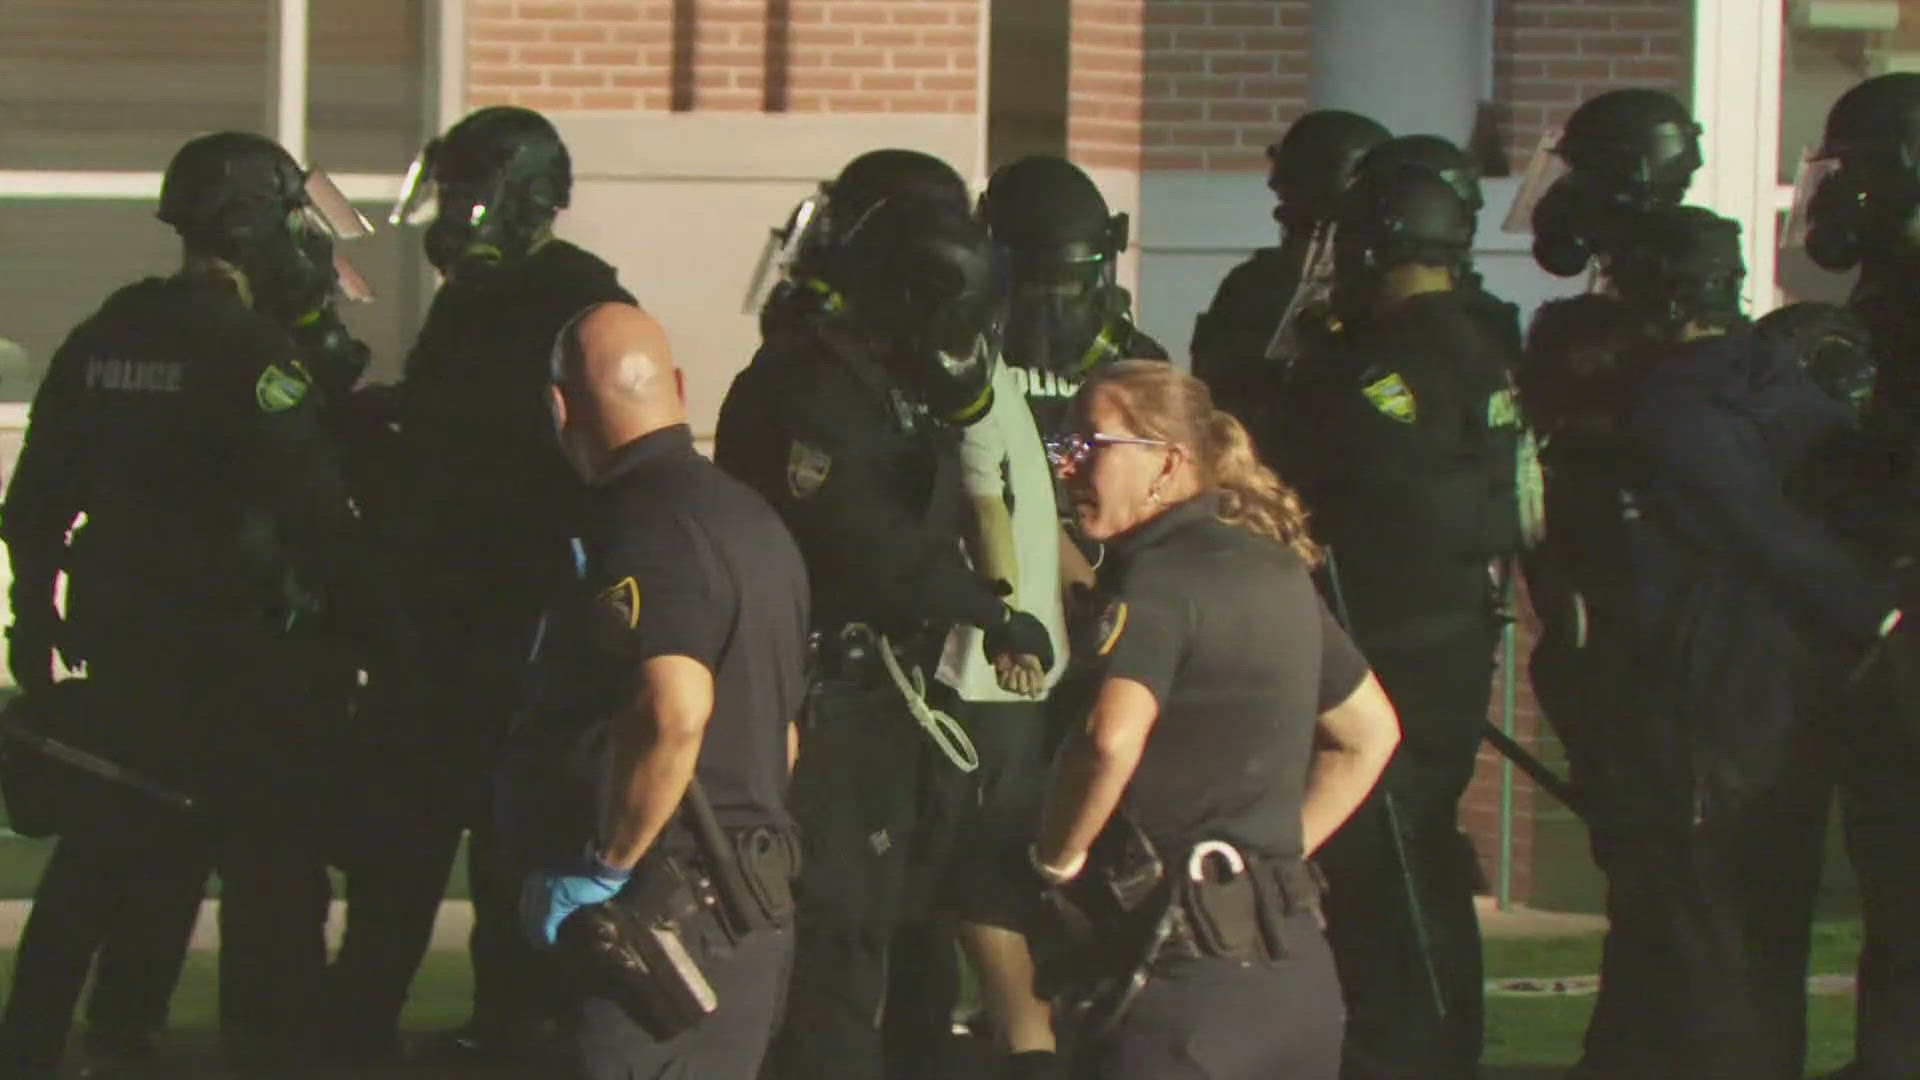 Protestors who stayed after 10 p.m. were arrested. Despite these events, UNF says graduation will go on.